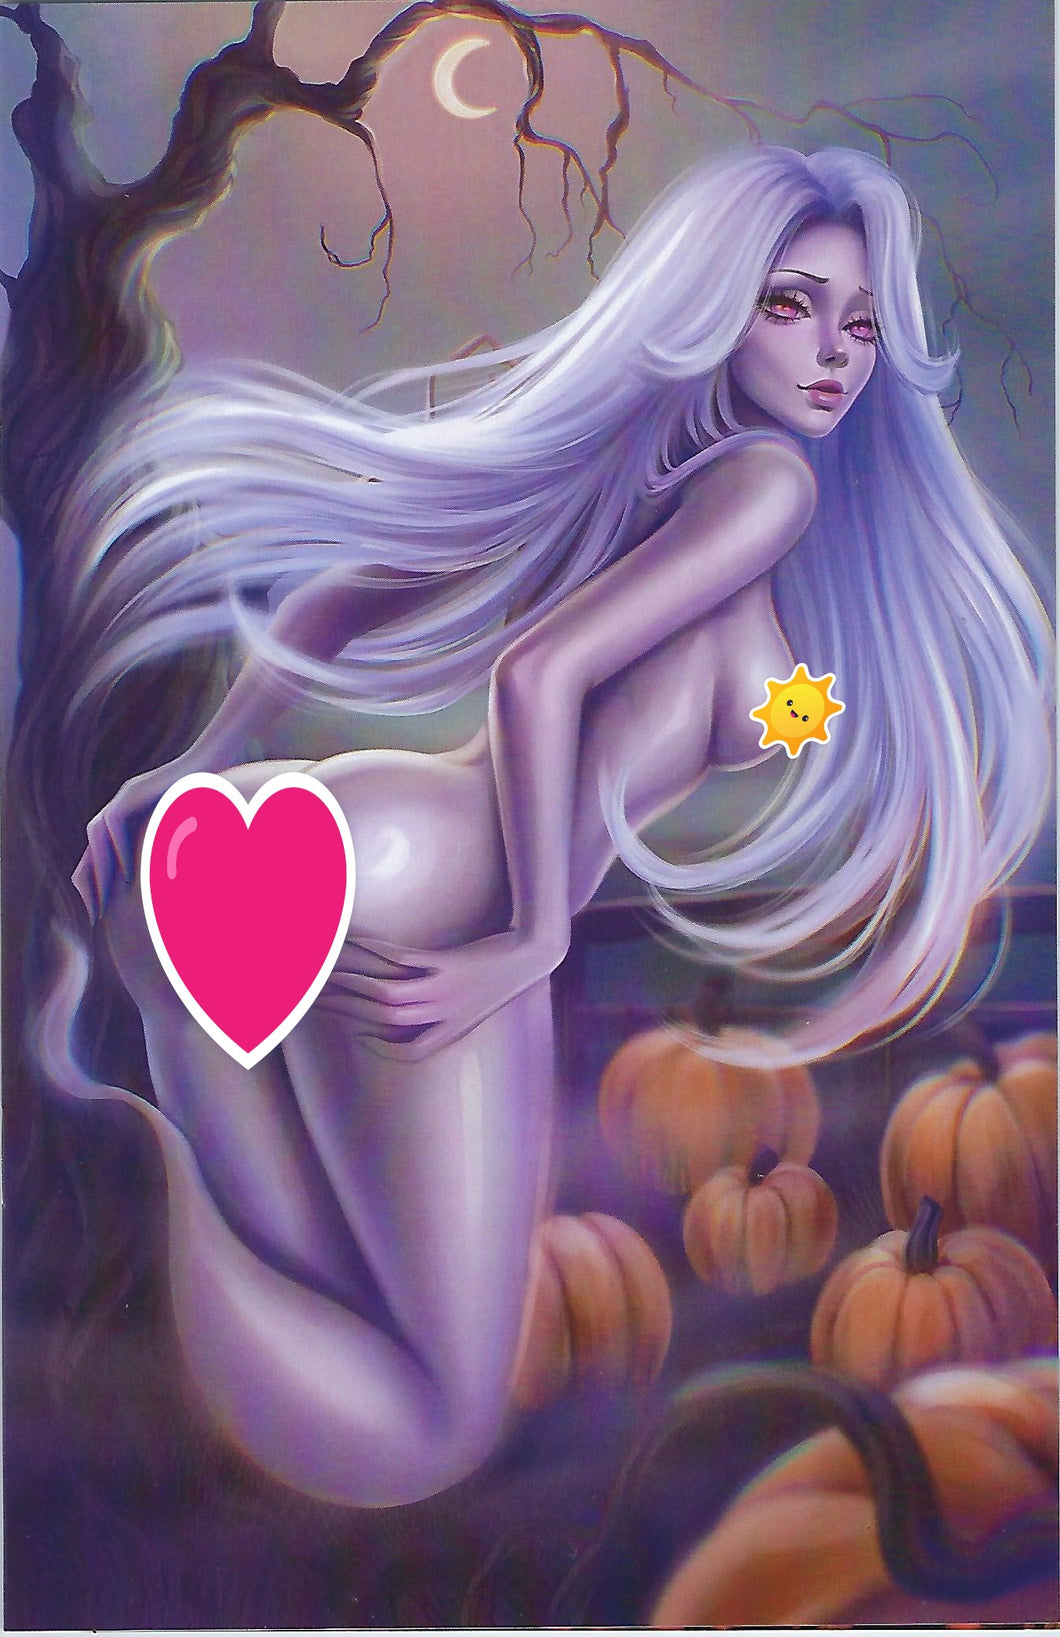 Totally Rad Halloween Karych FULL Nude Virgin Variant Ghost Cover !!!  NM